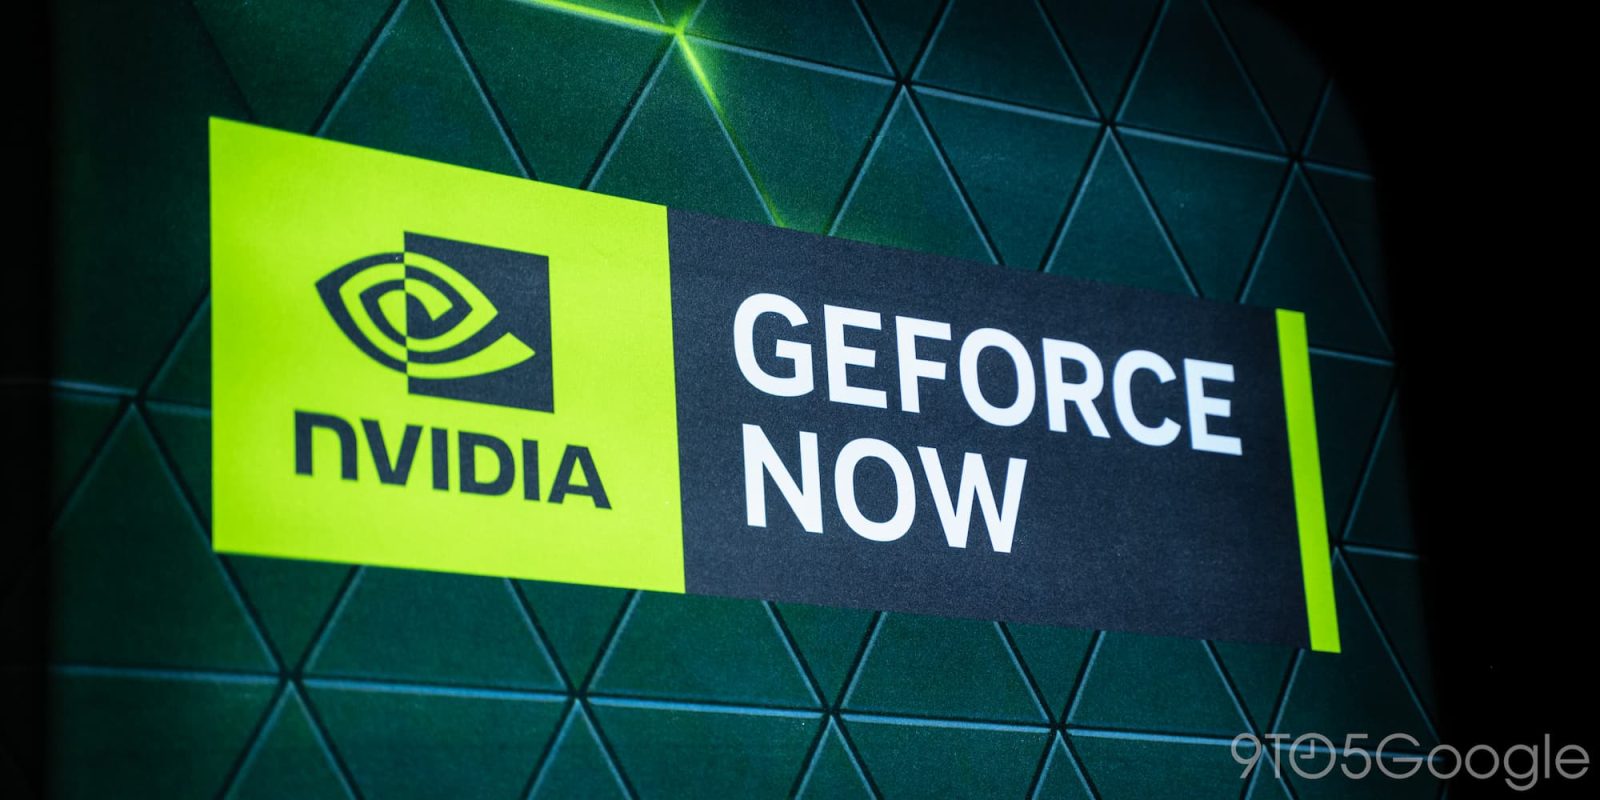 Nvidia GeForce Now prices are going up starting in November